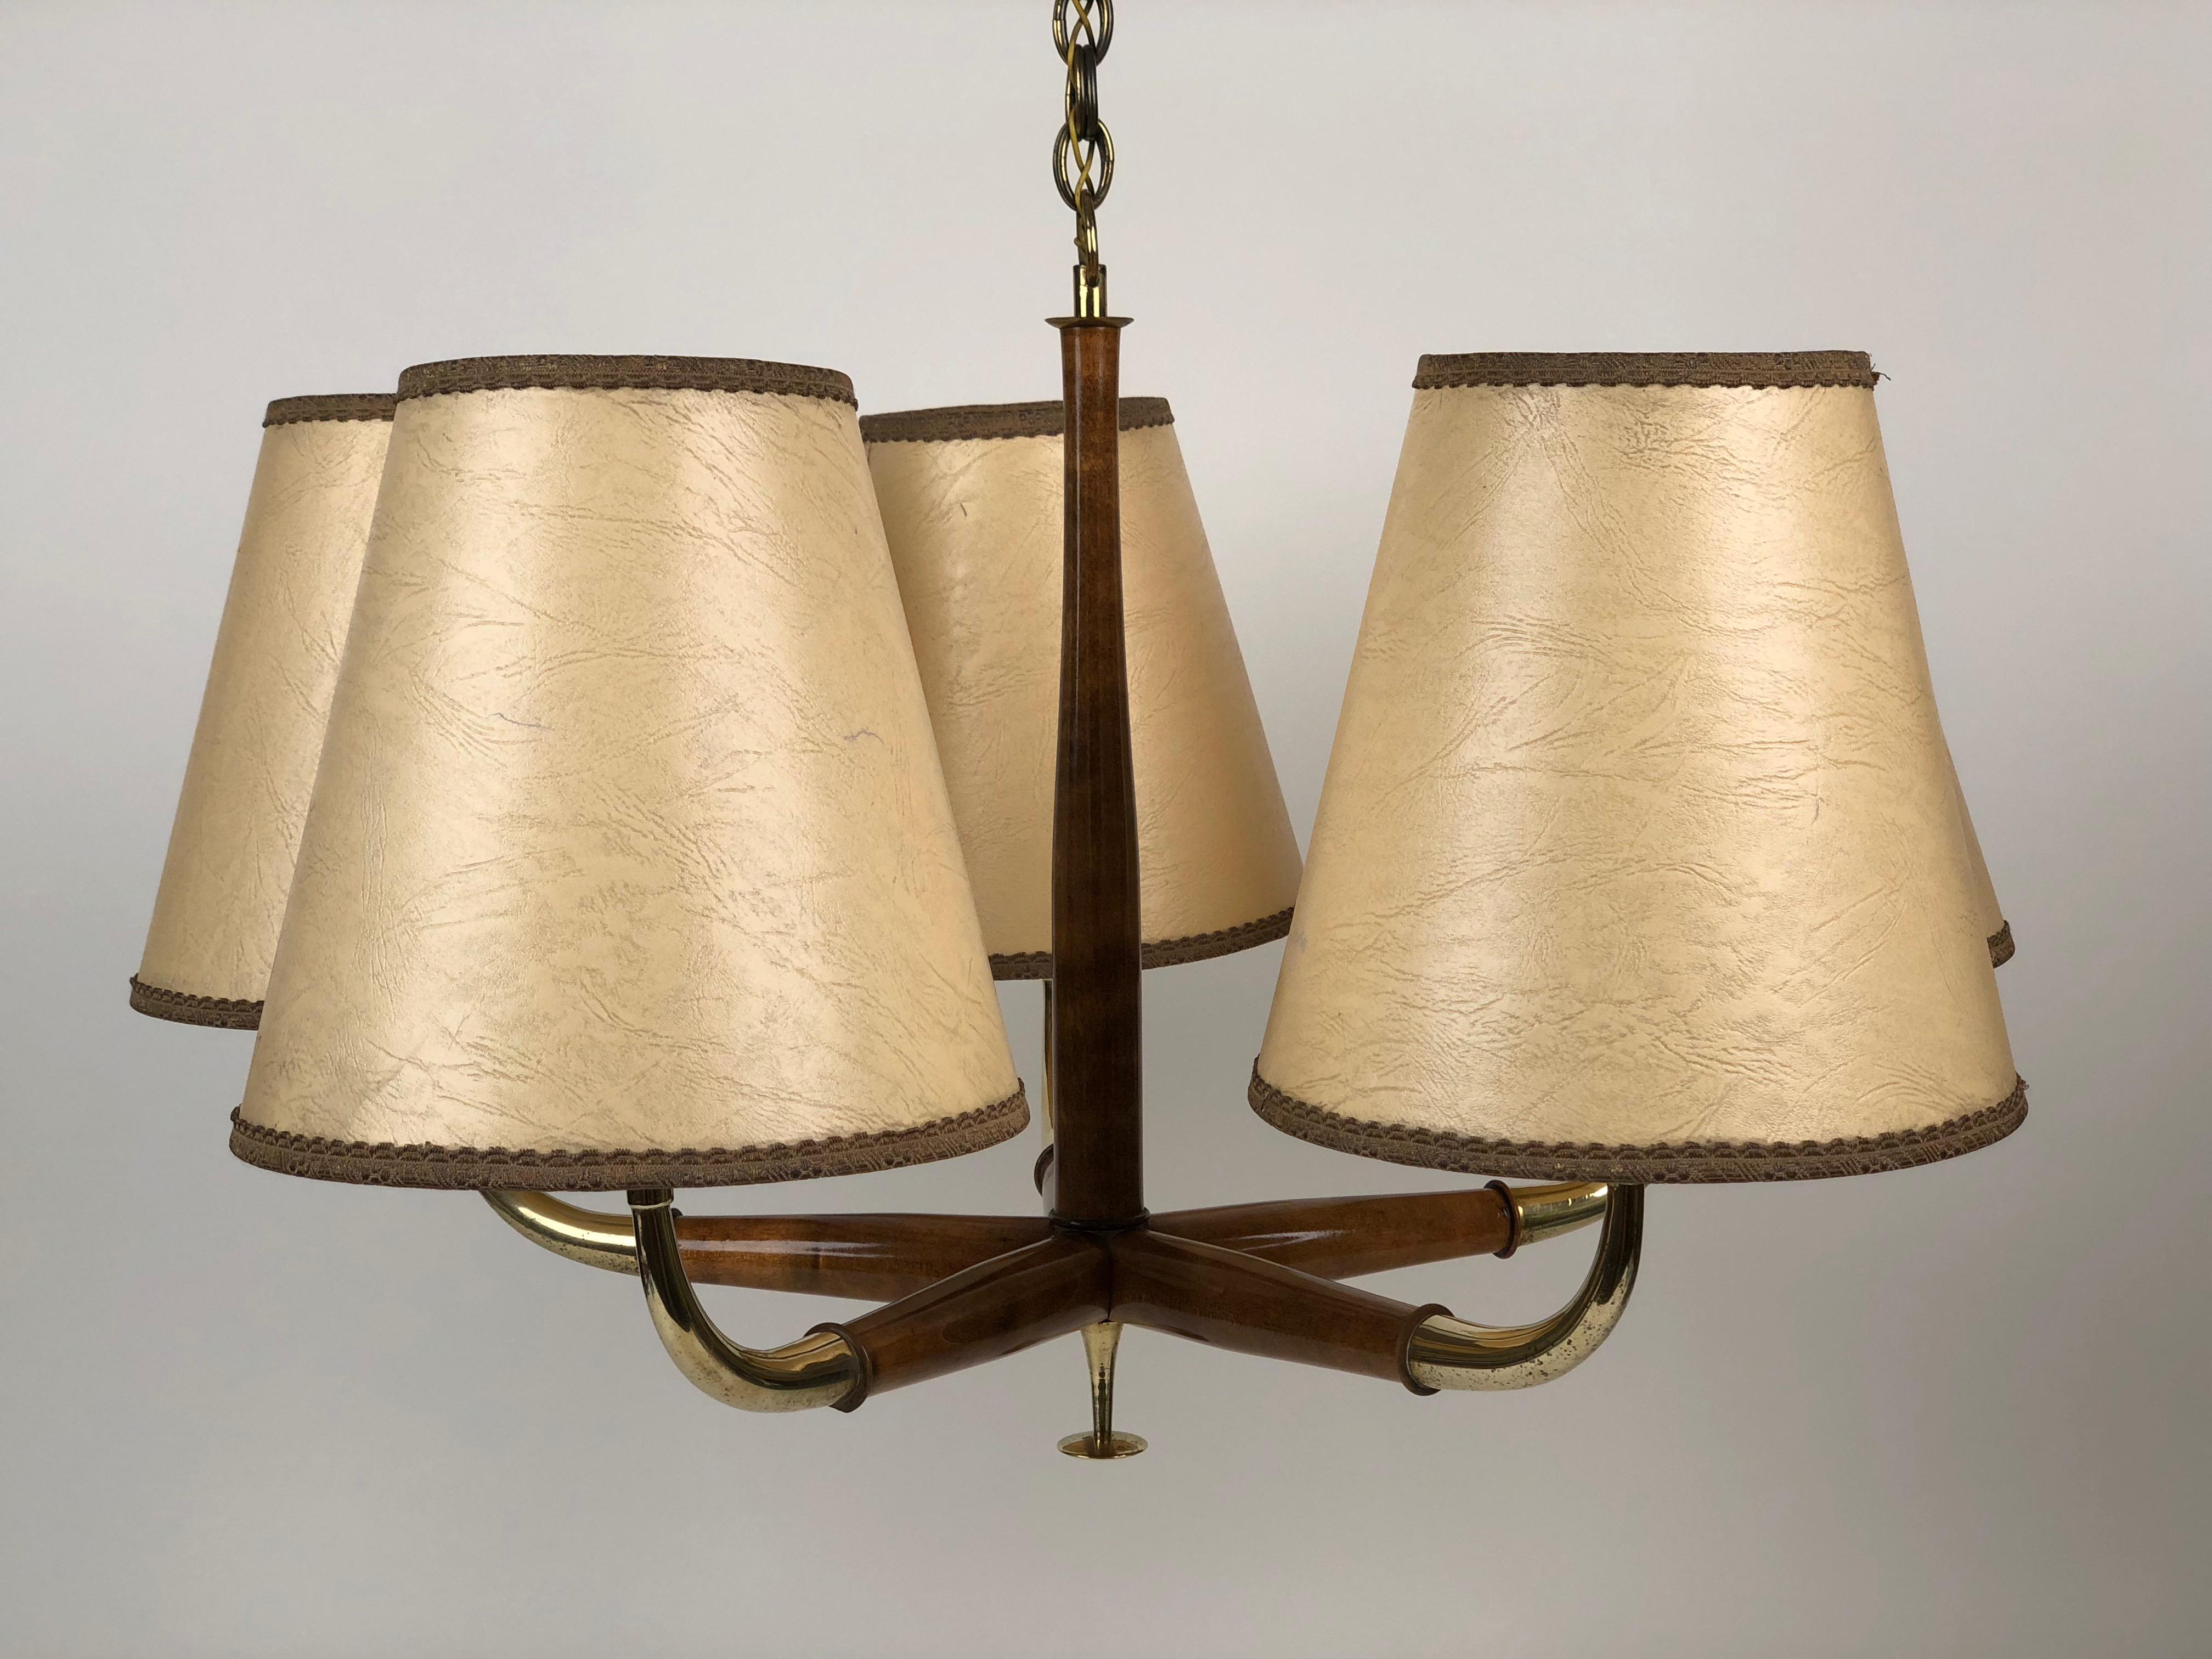 The chandelier has five arms, decorated with a button and an elegant double chain in brass.
The corpus is made from beech wood, stained in a walnut color. The shades are original.
One of the arms have a small chip in the wood. The chip is